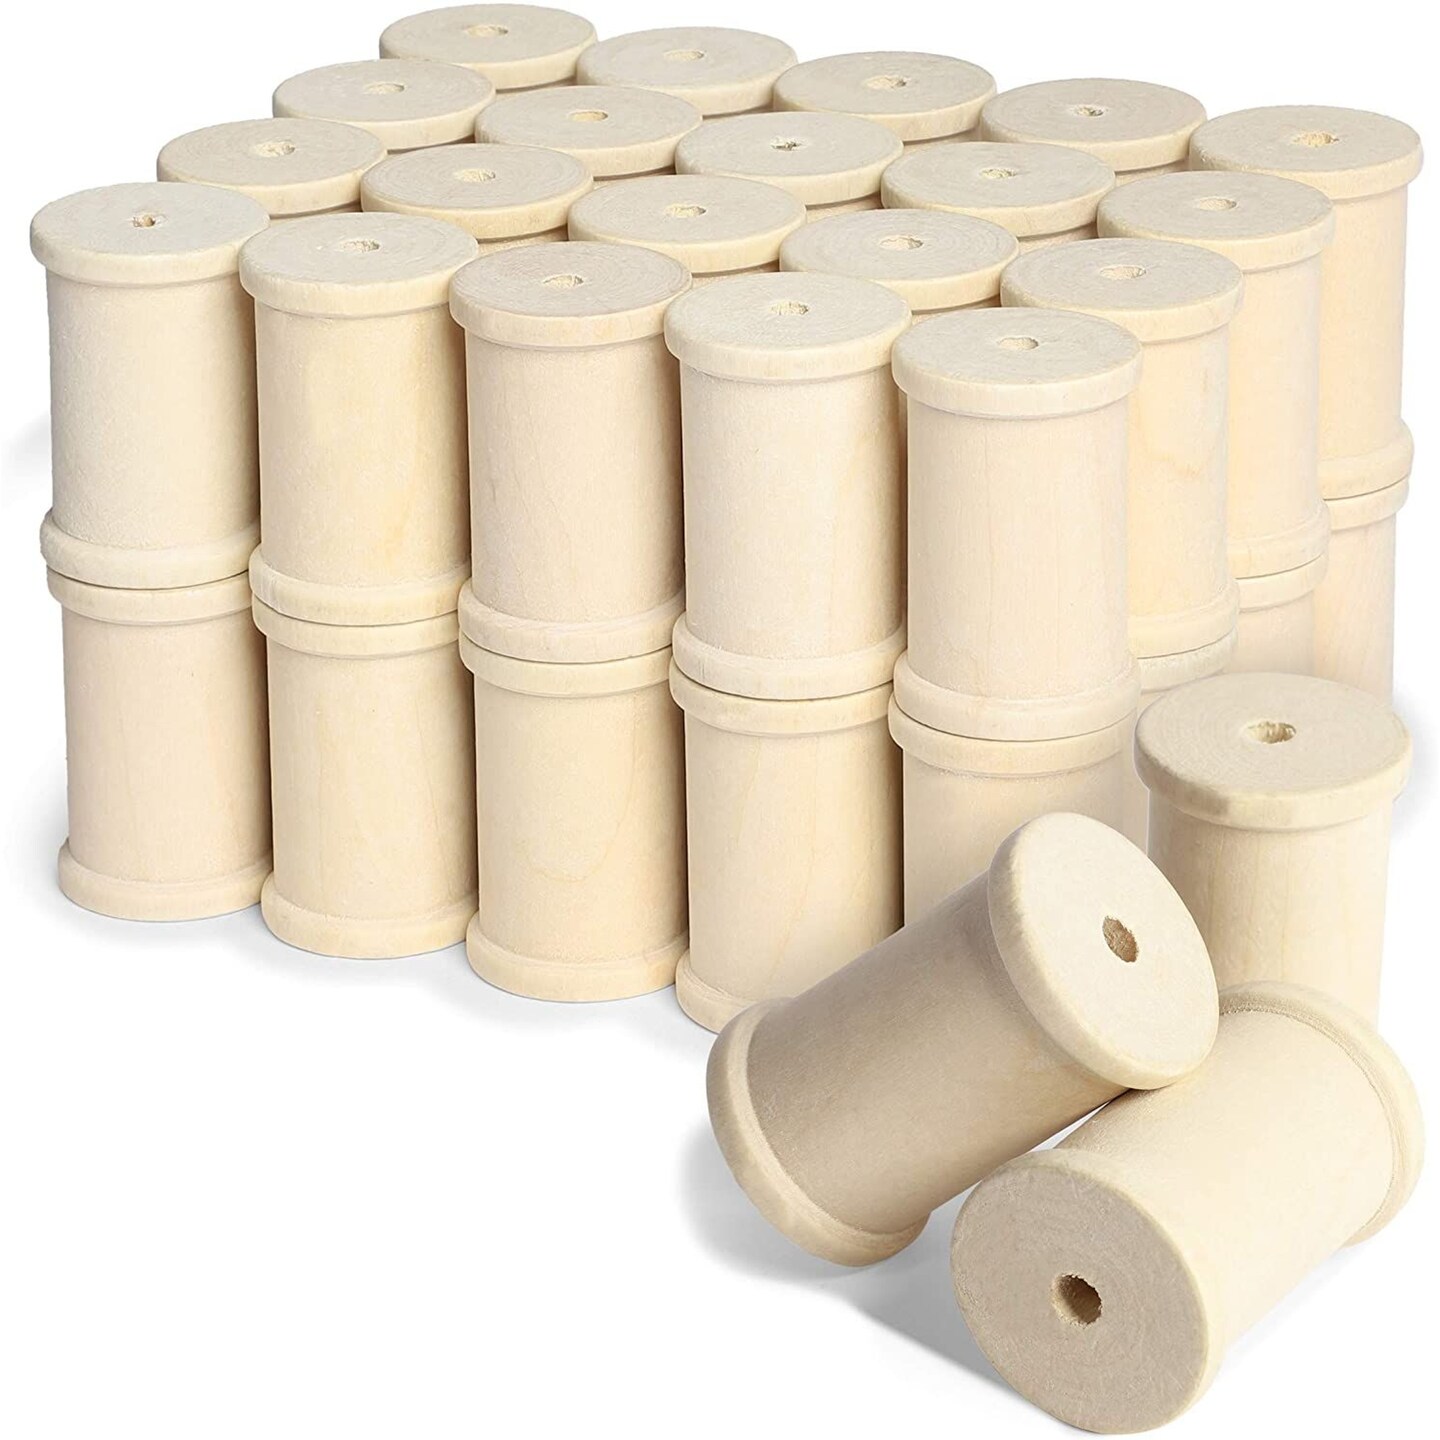 Dixon Wooden Craft Spools For Art Projects And More - 144 Pieces : Target